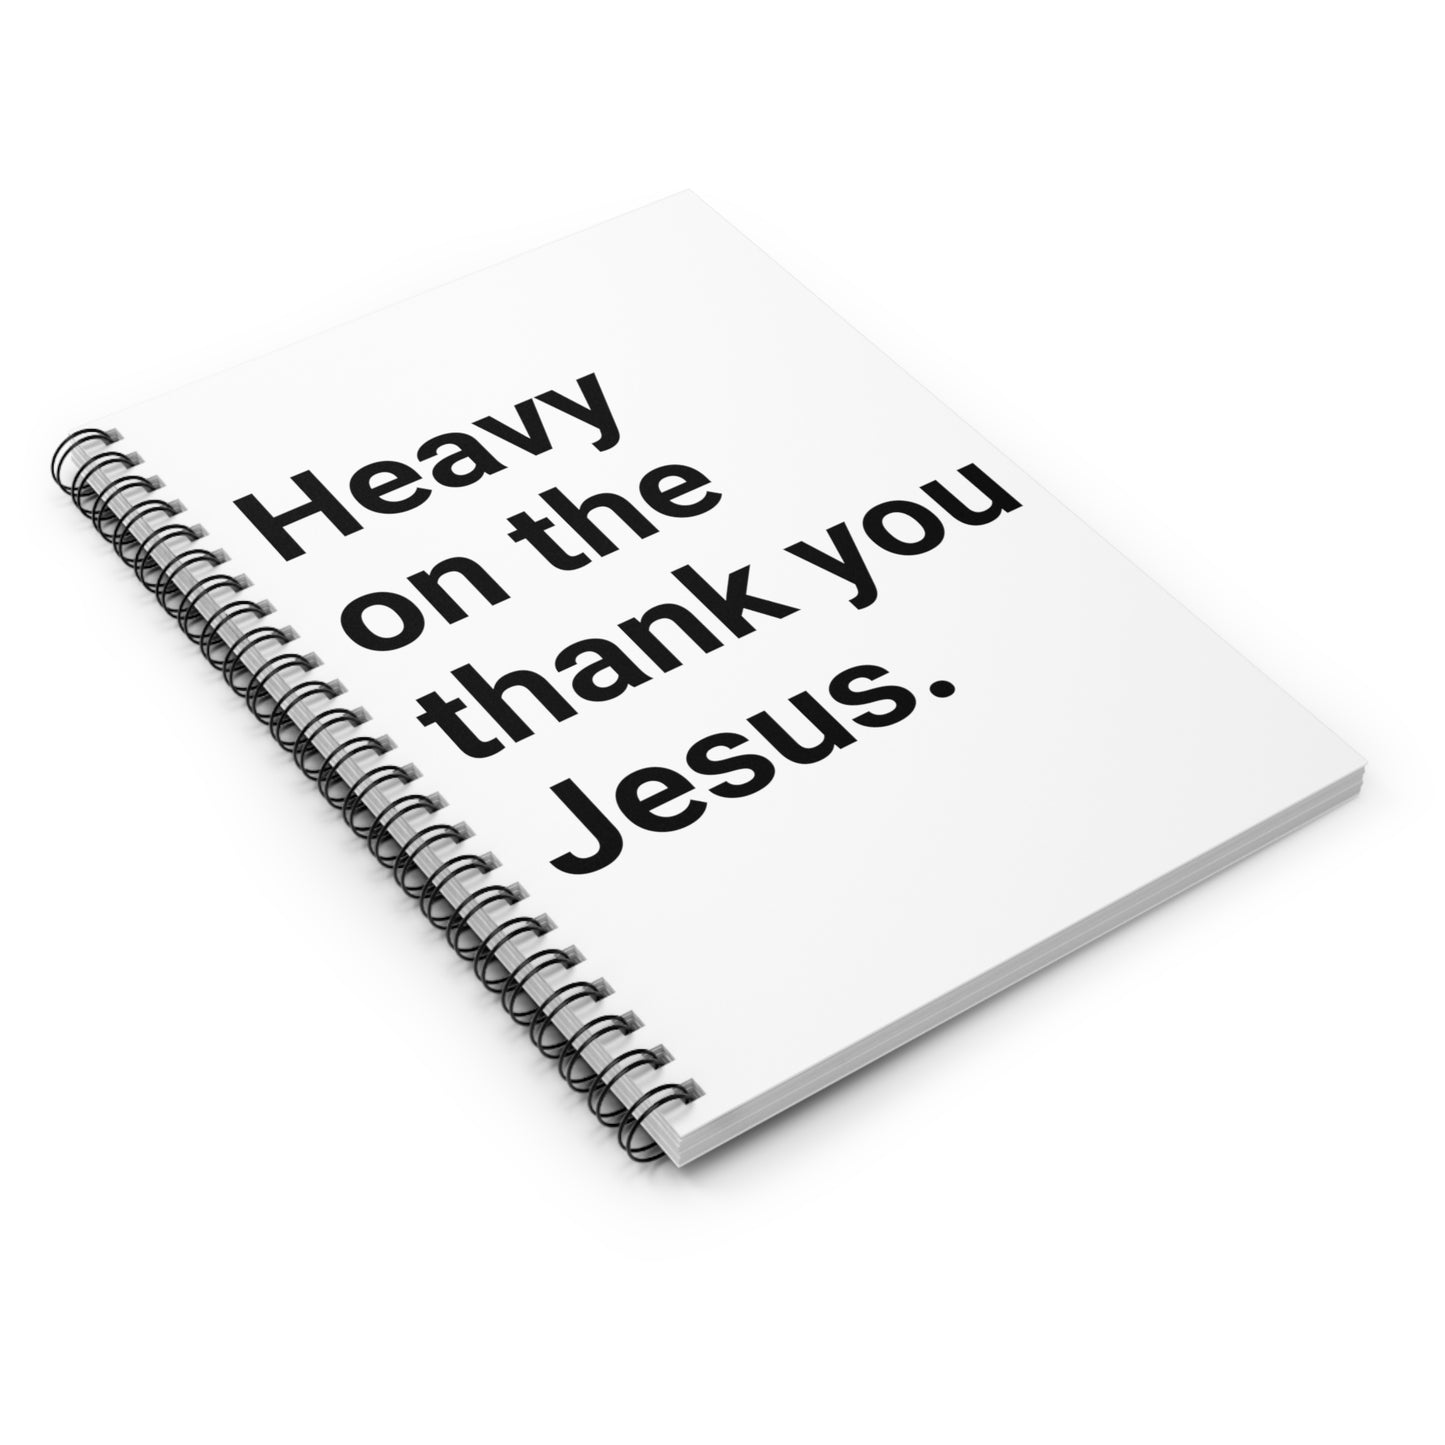 Heavy on the thank you Jesus Notebook - Ruled Line